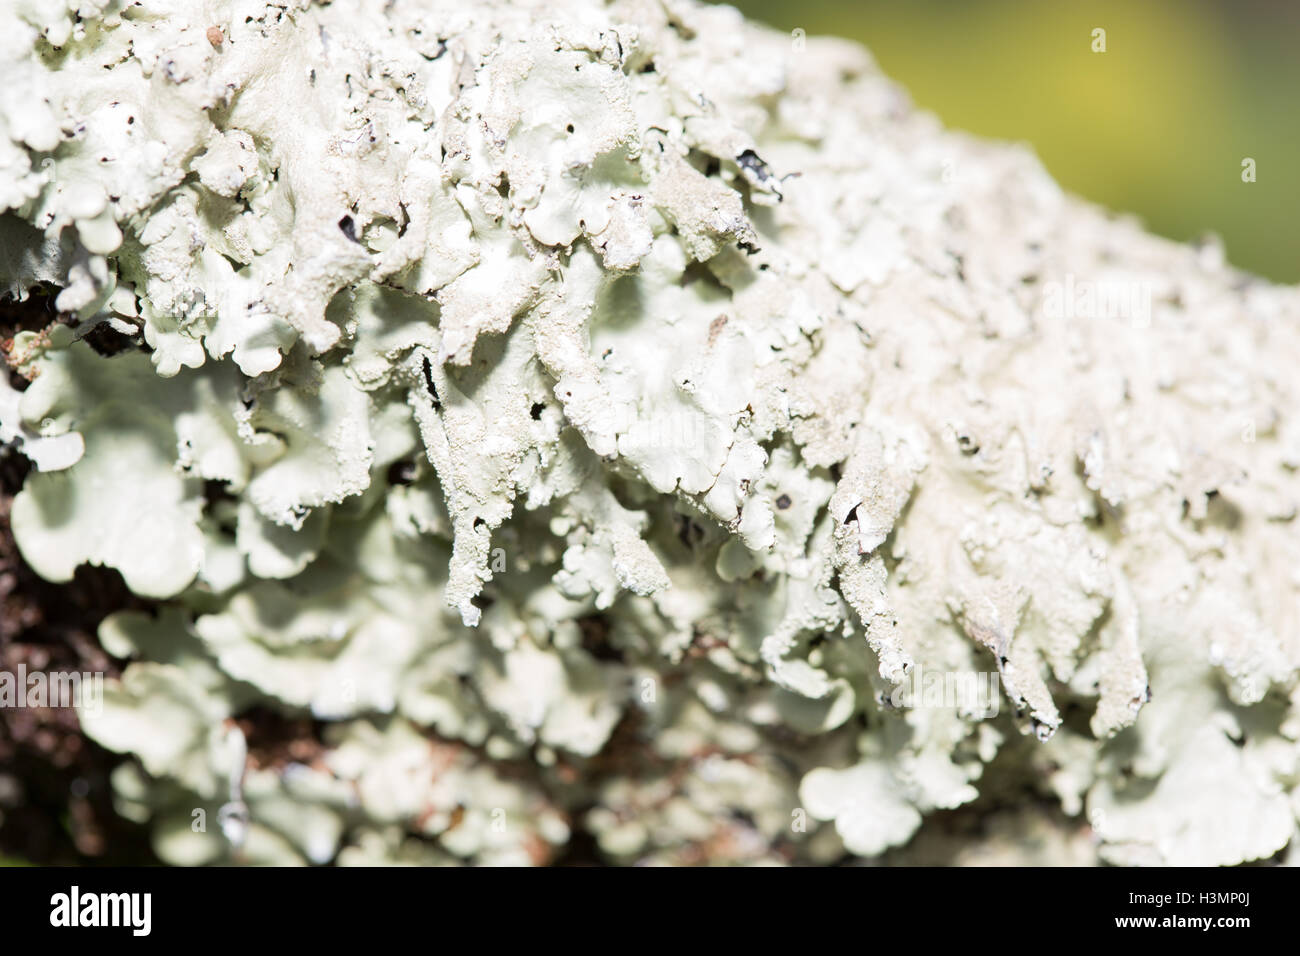 Lichen, Hypogymnia physodes growing on a tree trunk Stock Photo